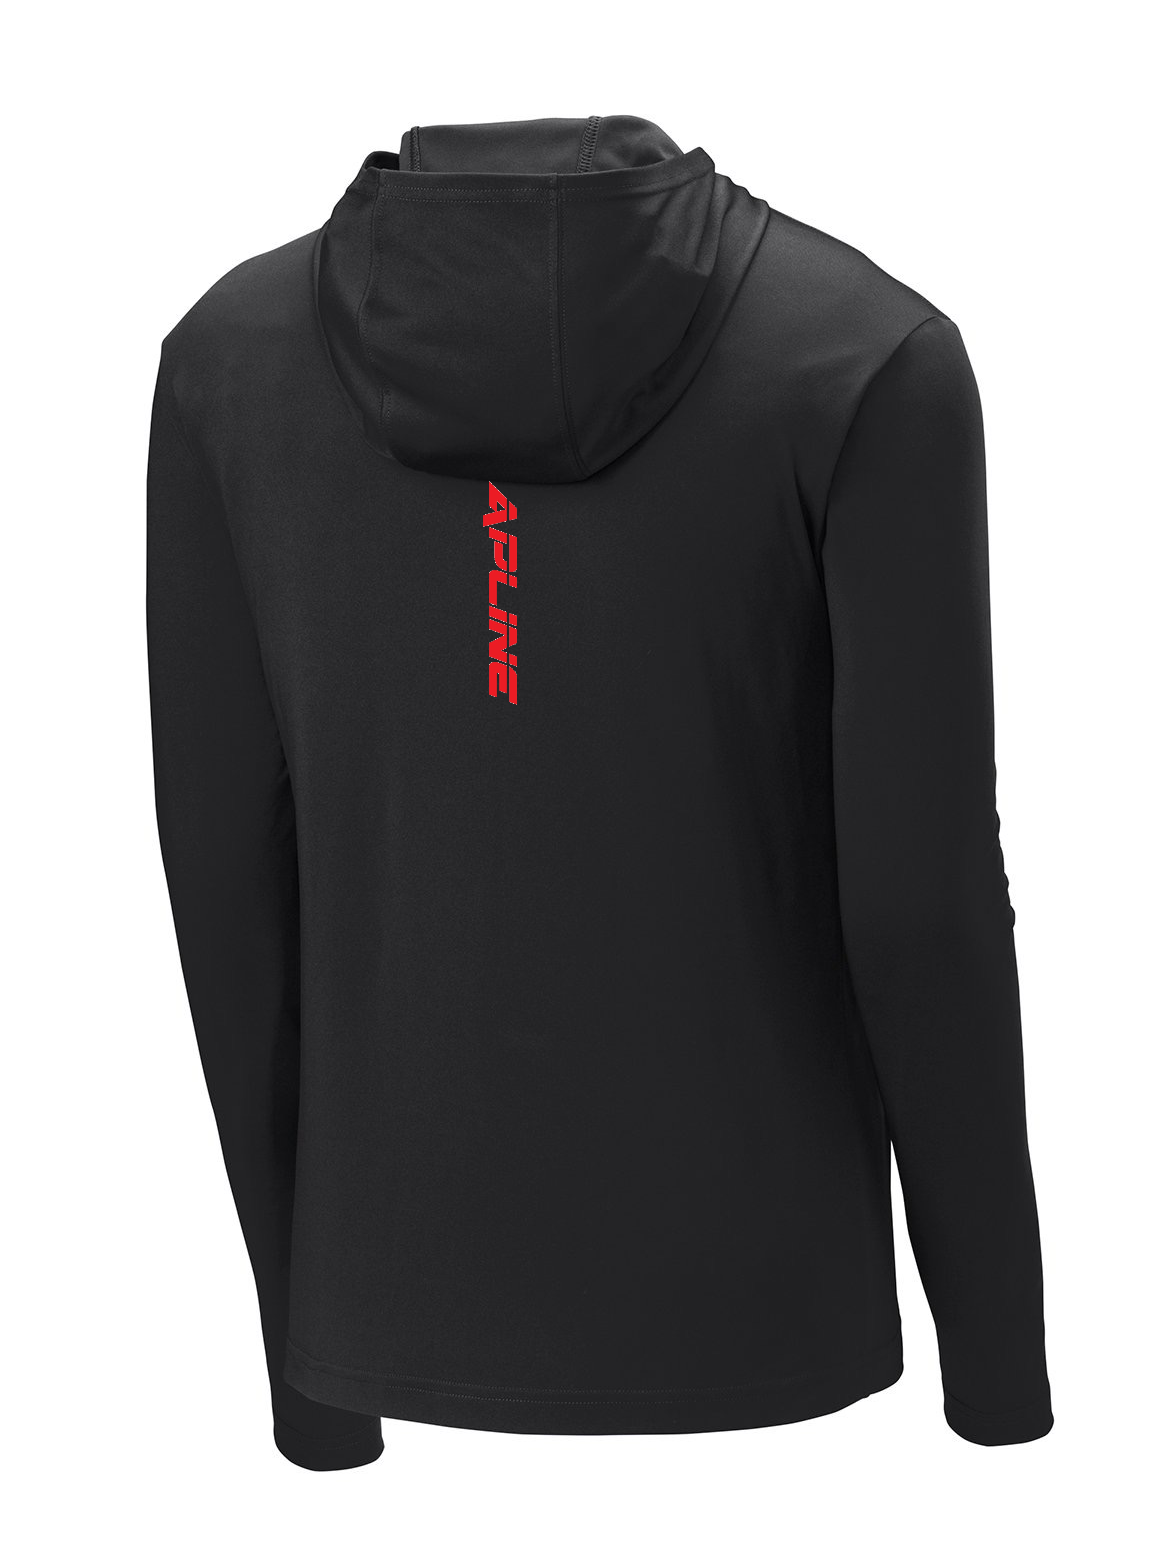 TS Red Text Polyester Athletic Long-Sleeved Hooded Shirt